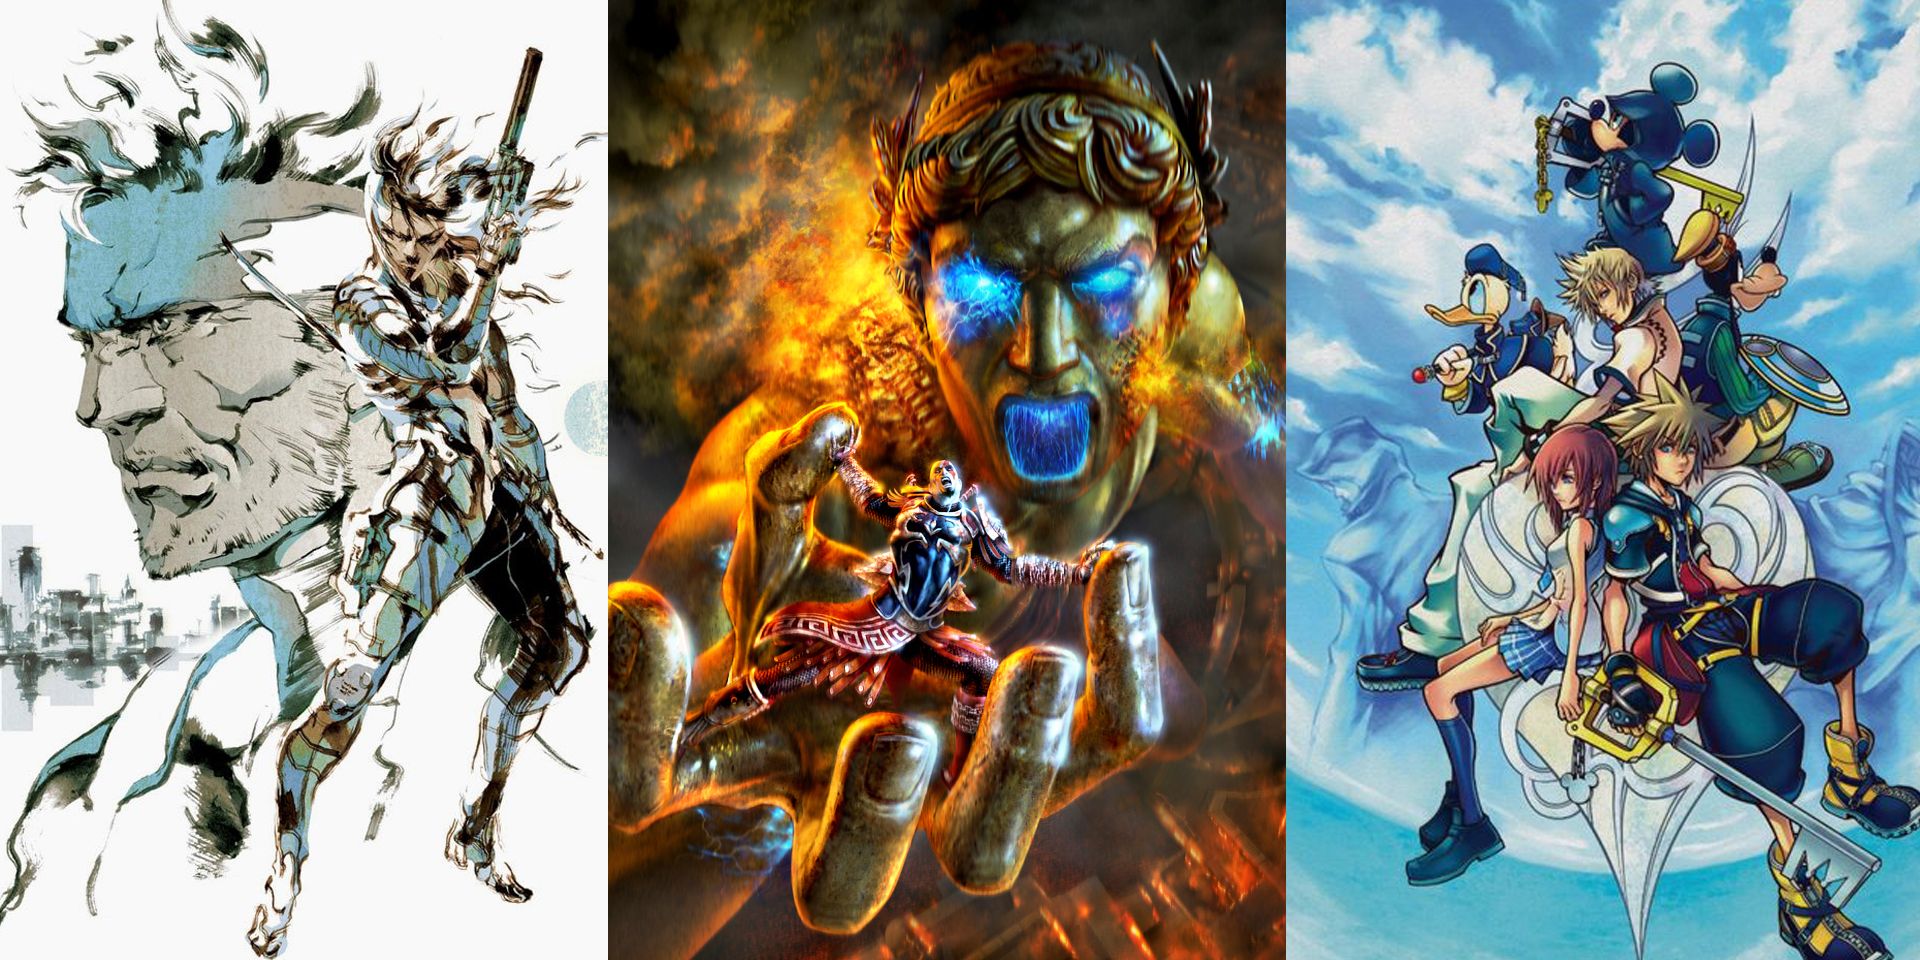 A collage of concept art from classic PlayStation 2 titles.